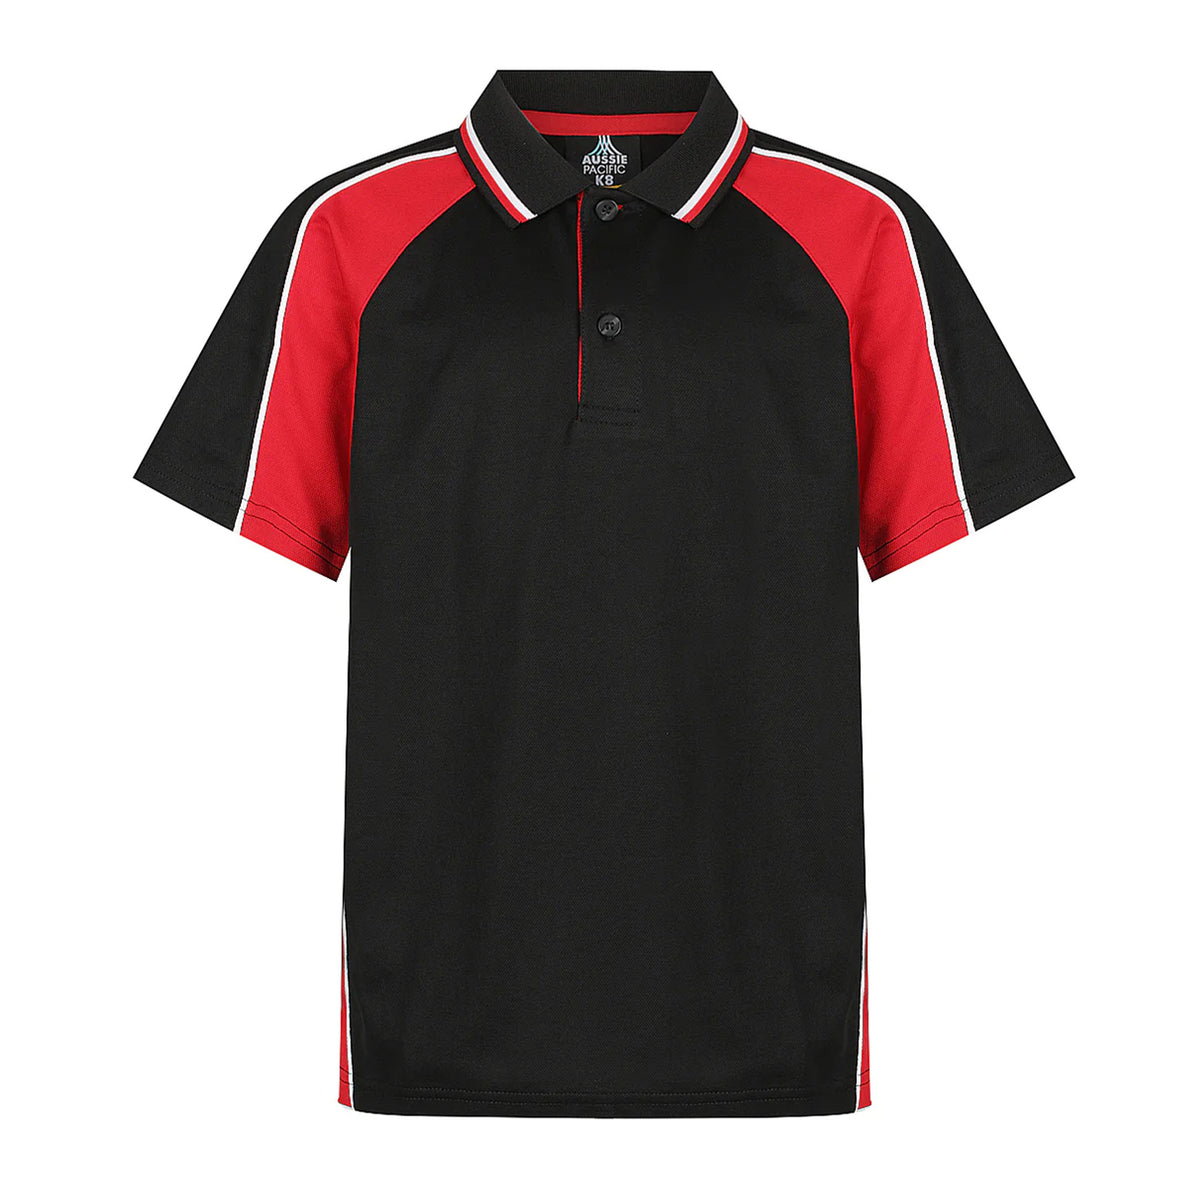 aussie pacific panorama kids polos in black red white